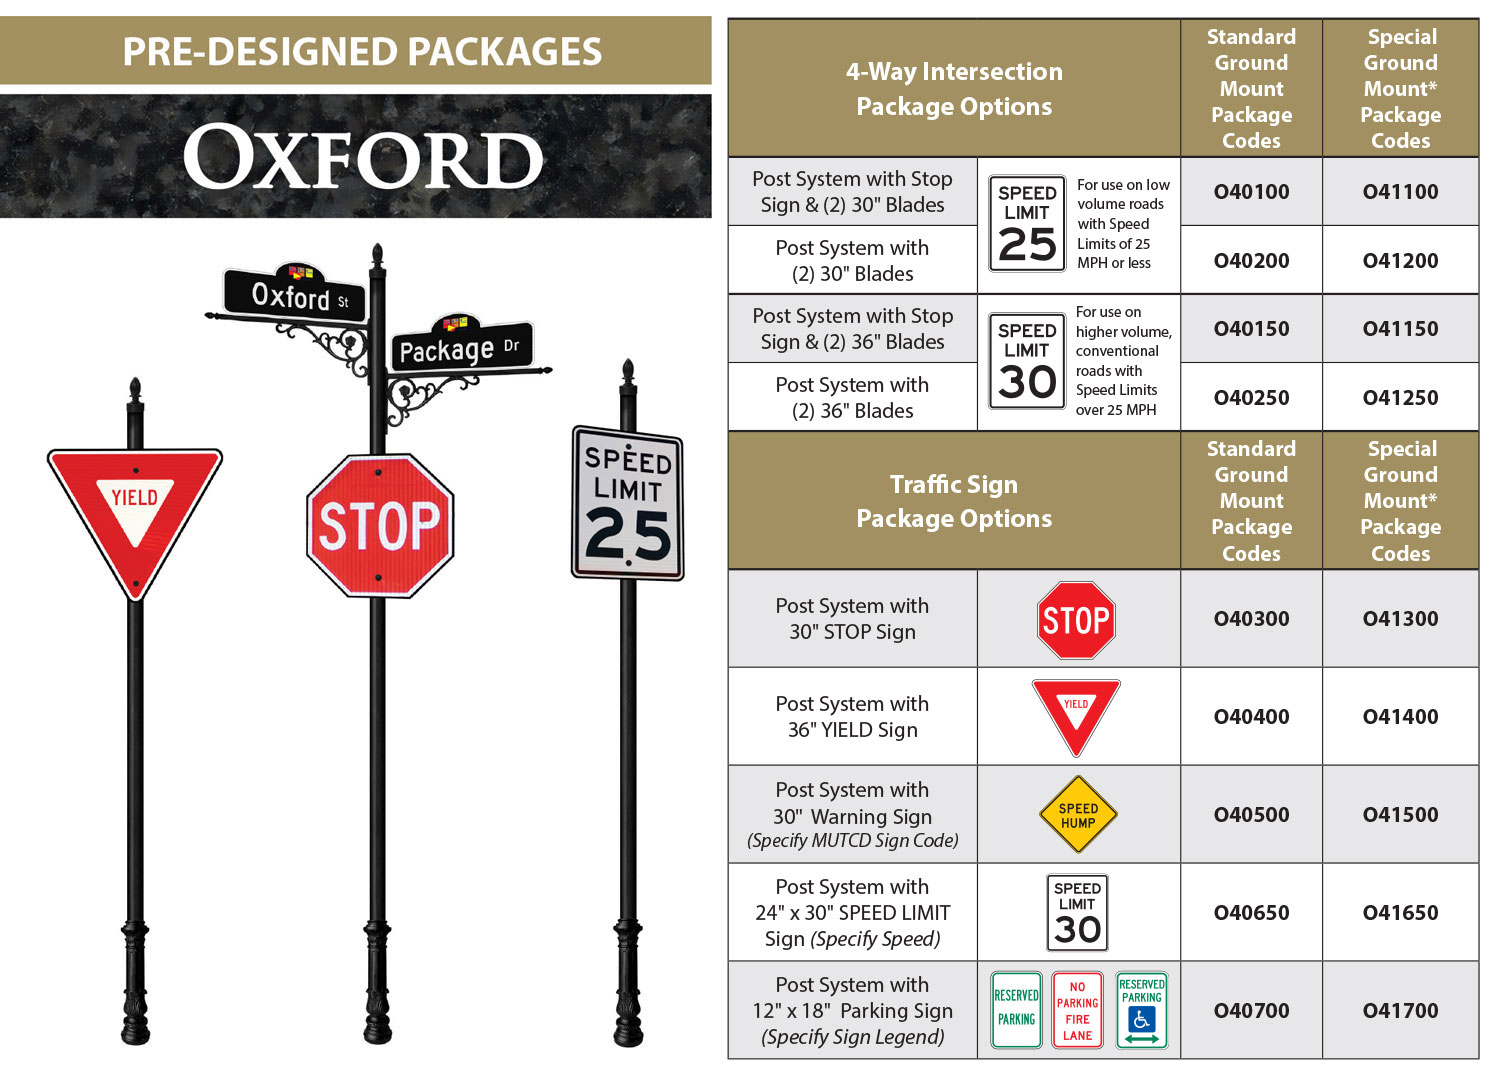 Oxford Packages Overview